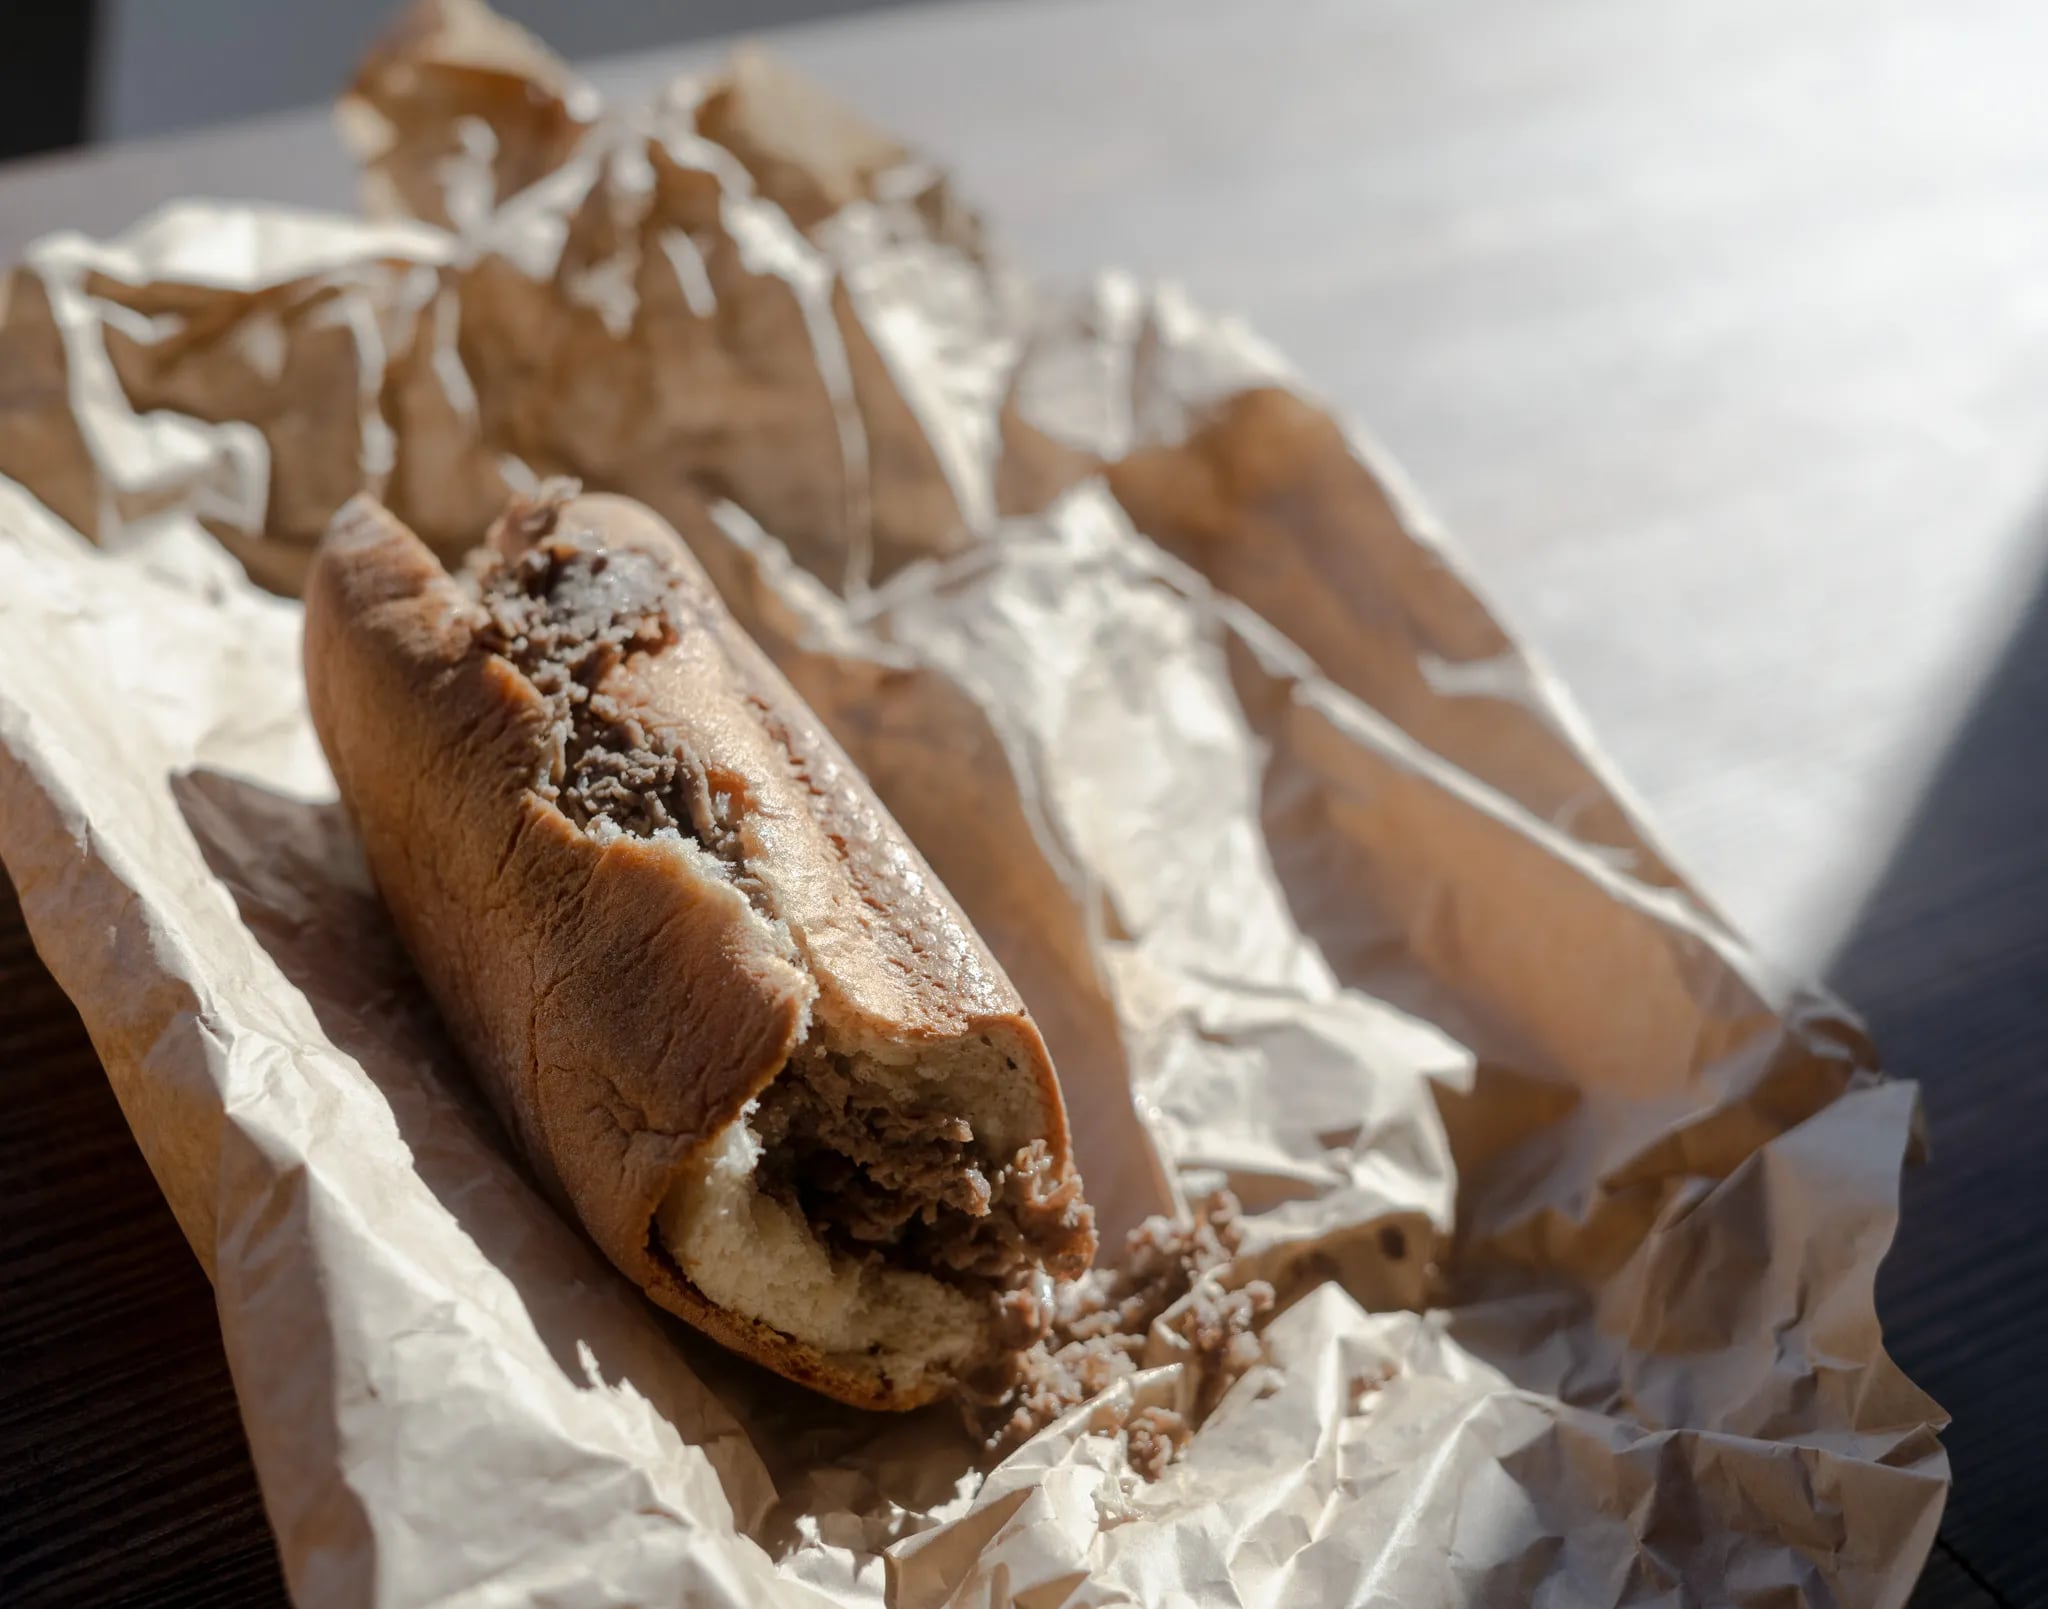 A gluten-free cheesesteak from the Gluten-Free concession stand at Citizens Bank Park.